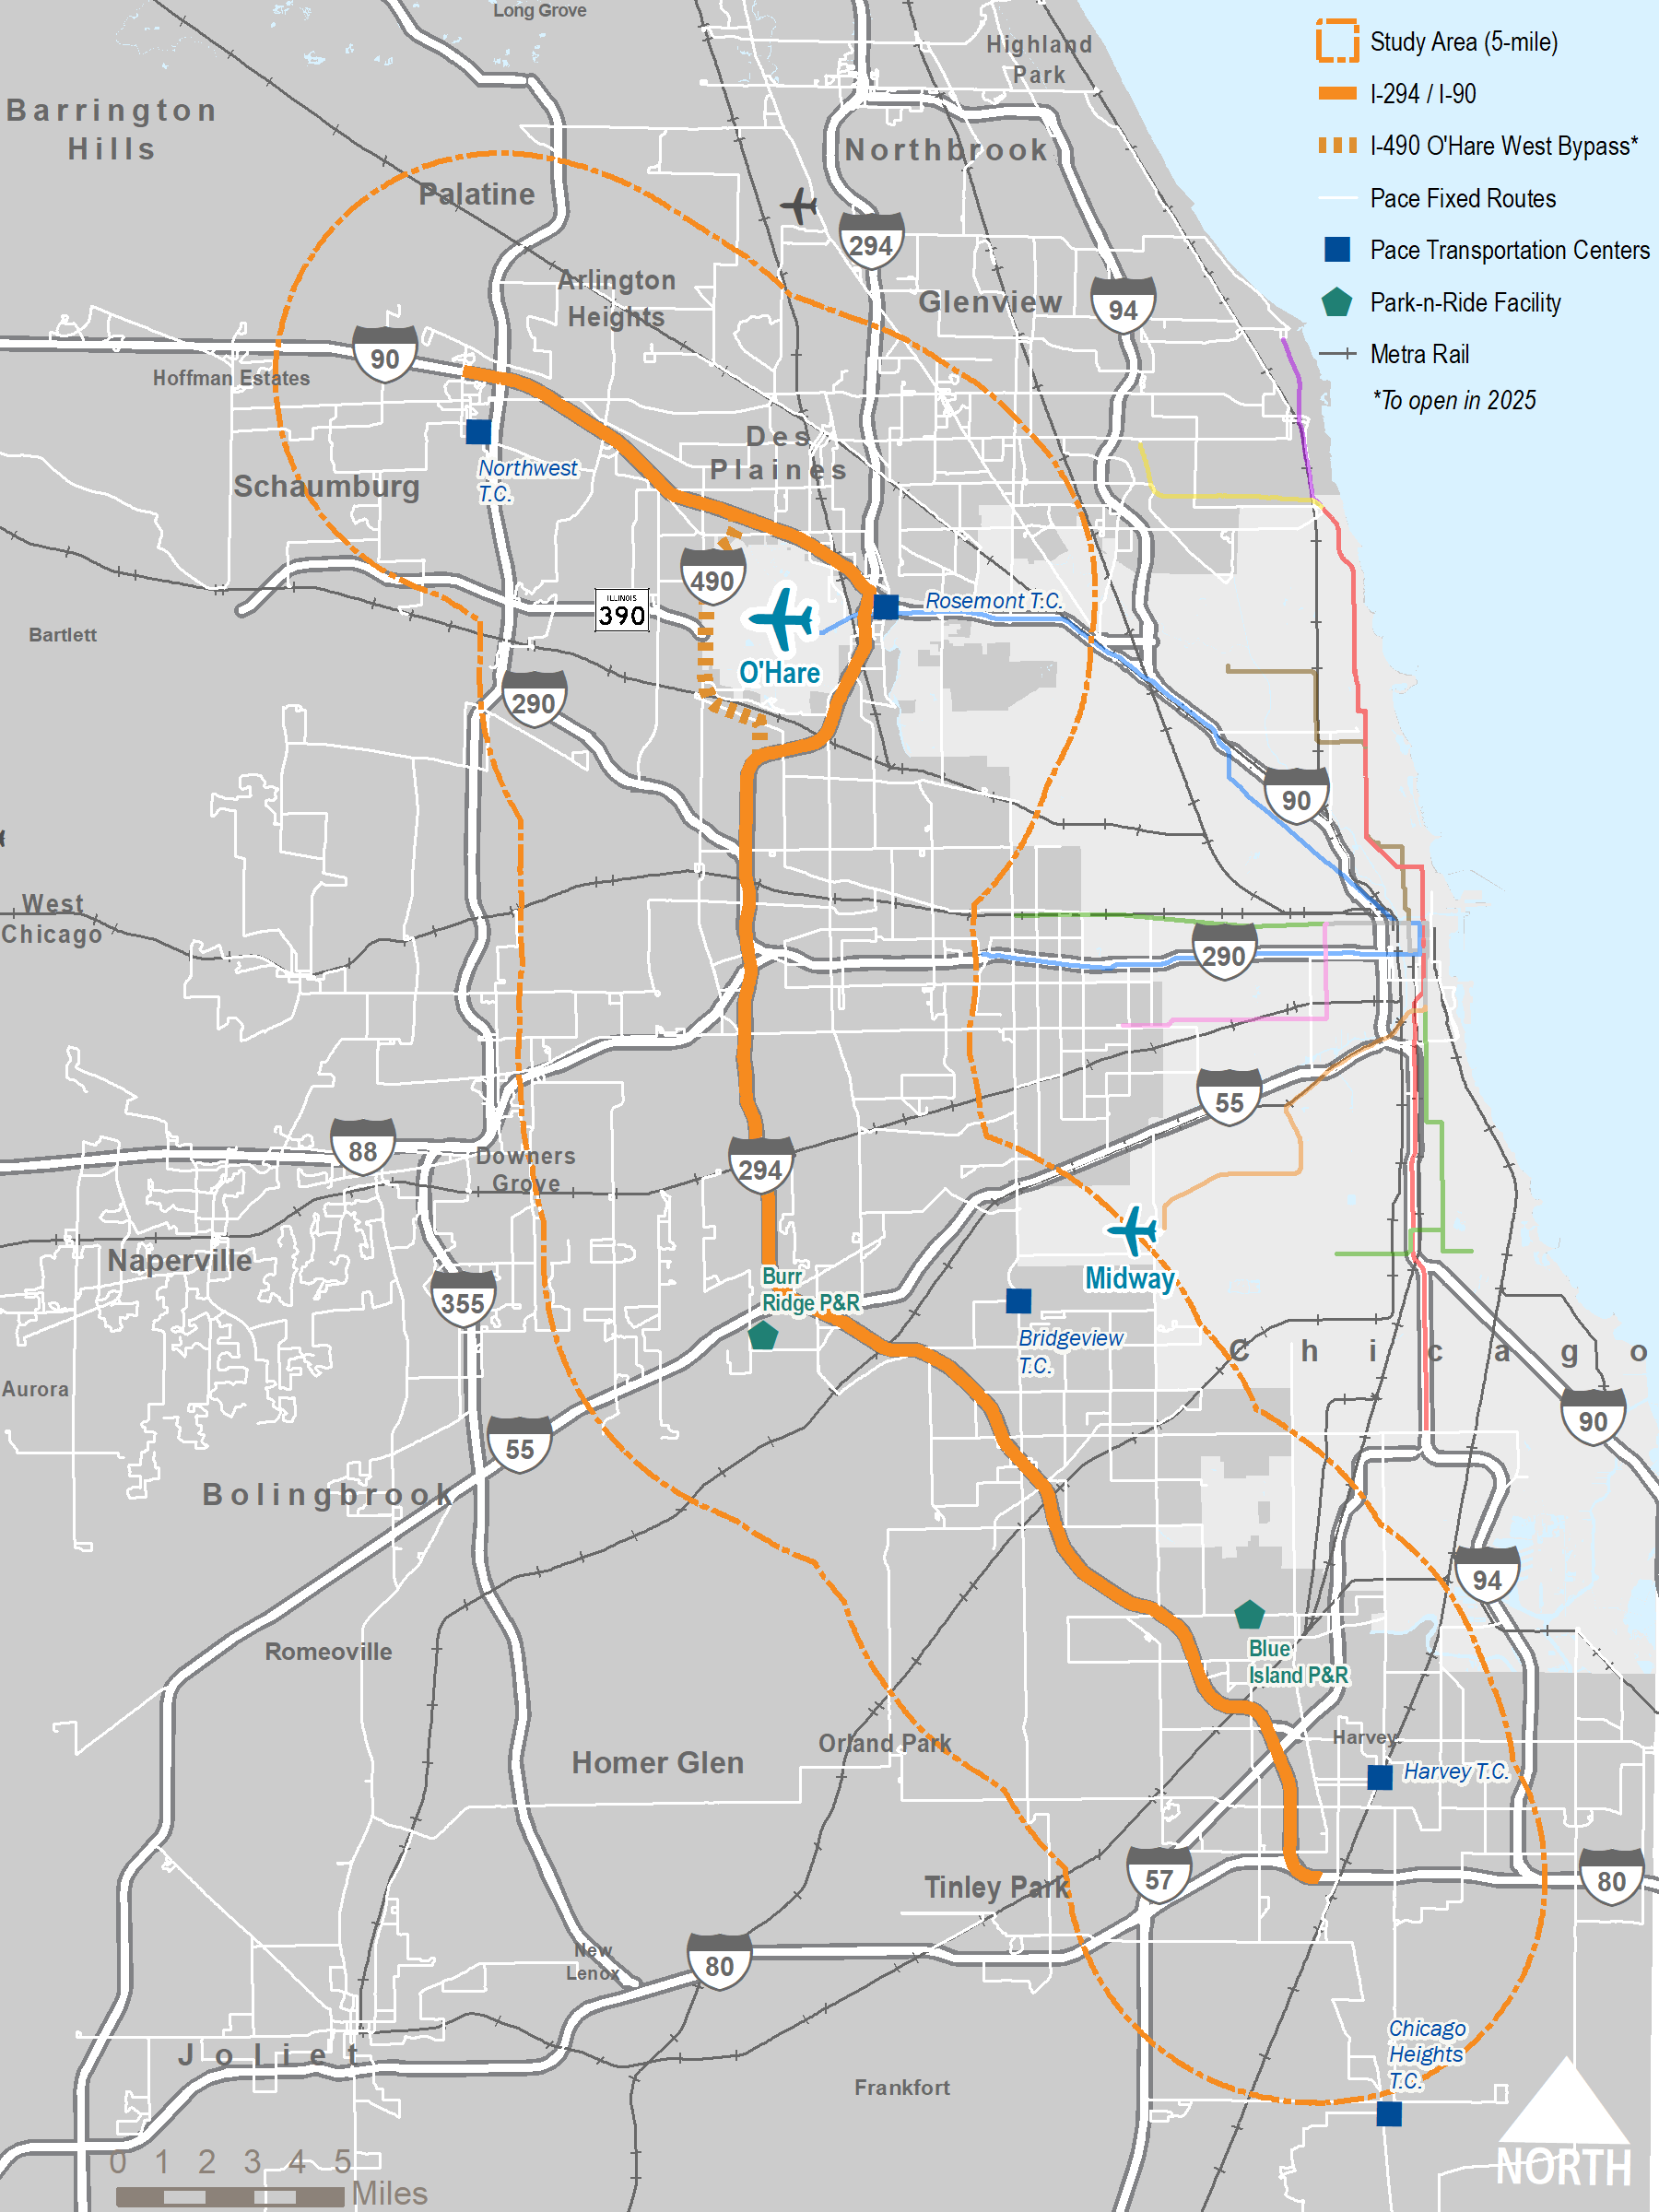 map of the I-294 Study Area